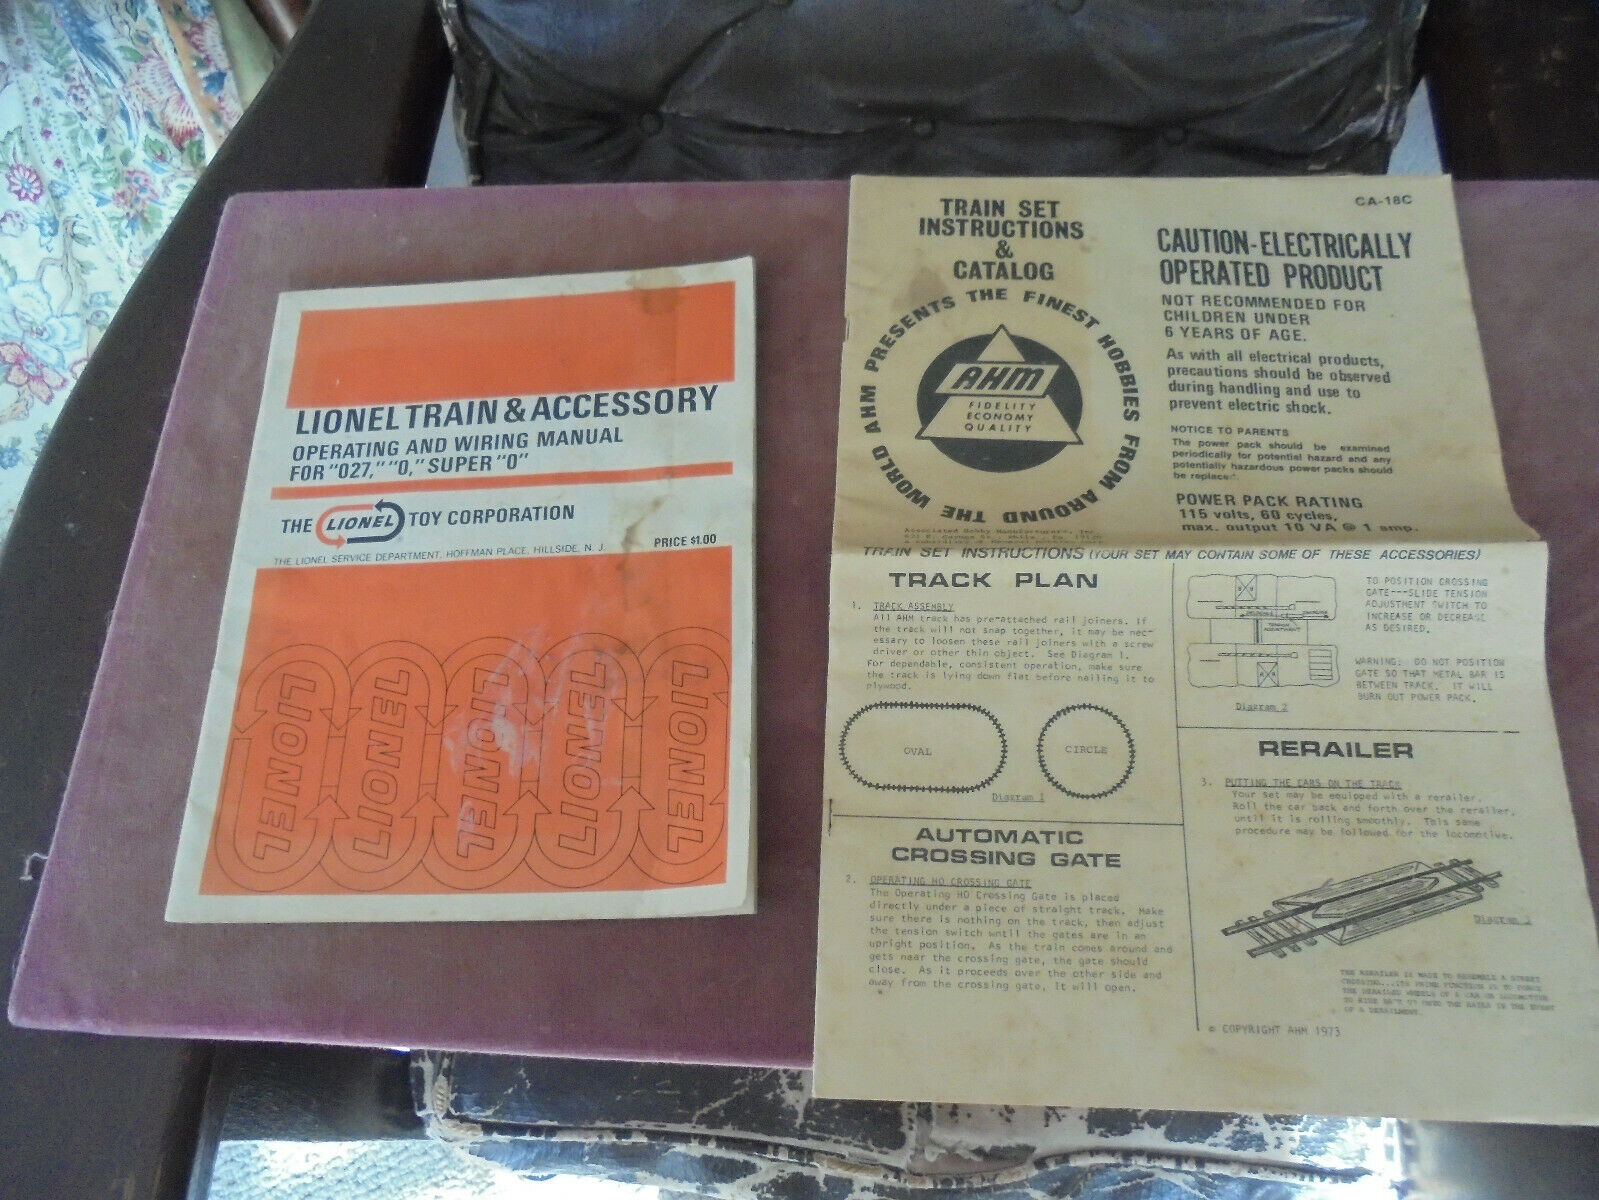 Vintage Lionel Train & Accessory Operating And Wiring Manual And Ahm Catalog